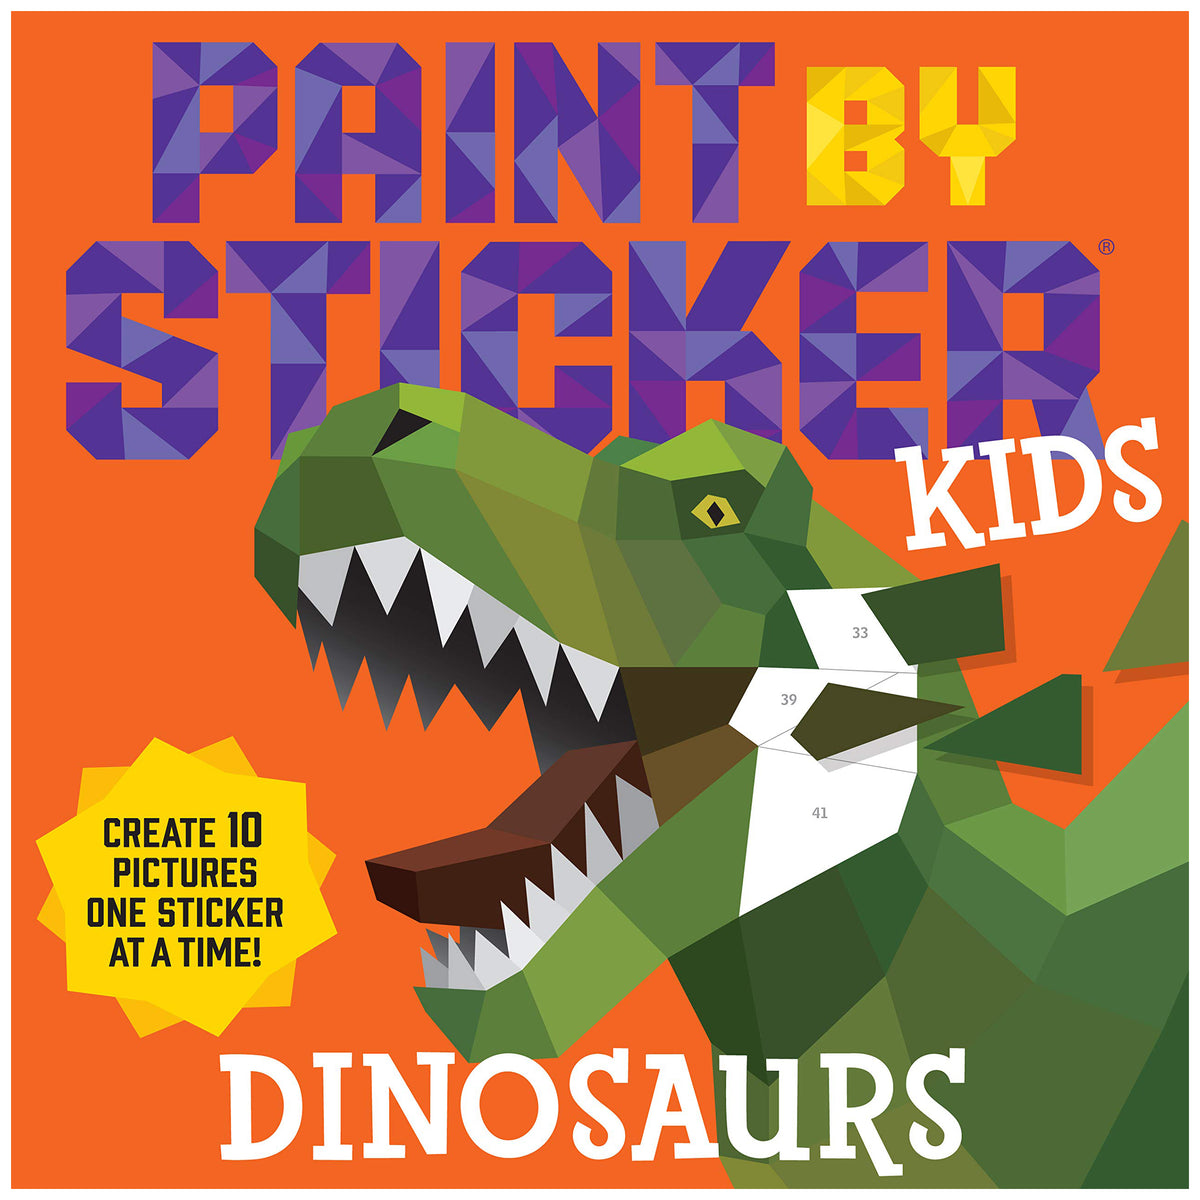 Paint by Sticker Dinosaurs